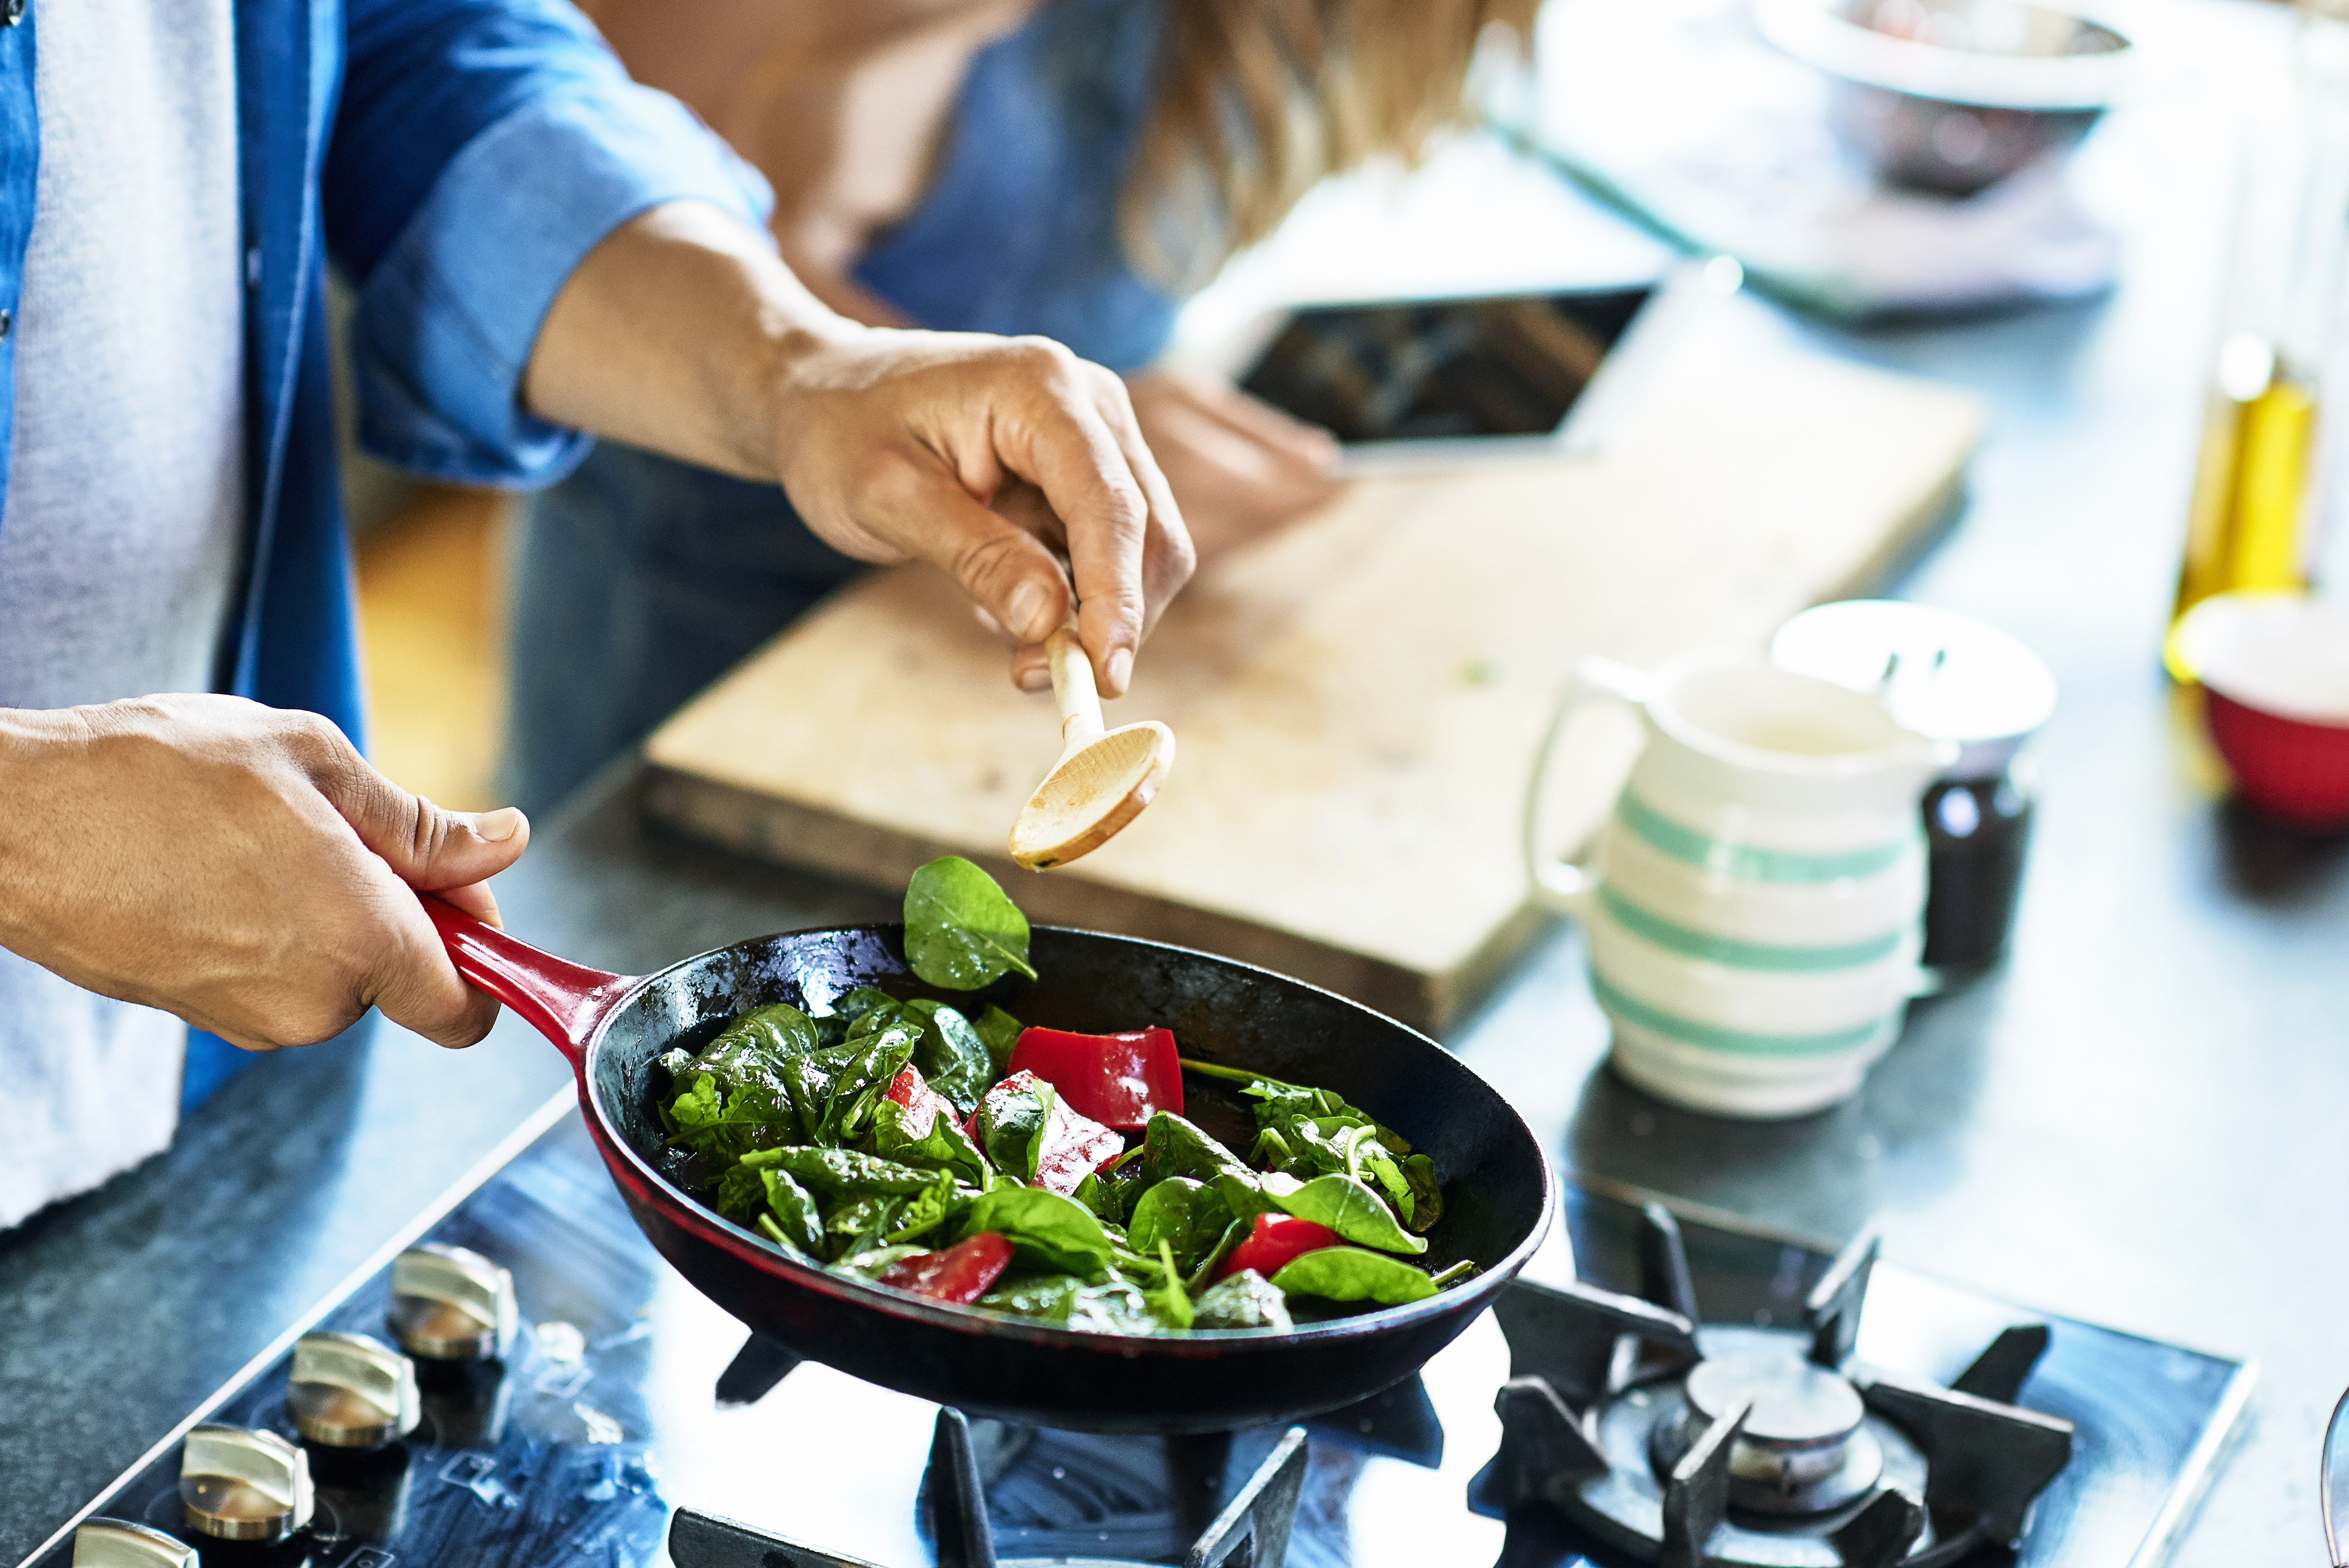 The healthiest ways to cook veggies and boost nutrition